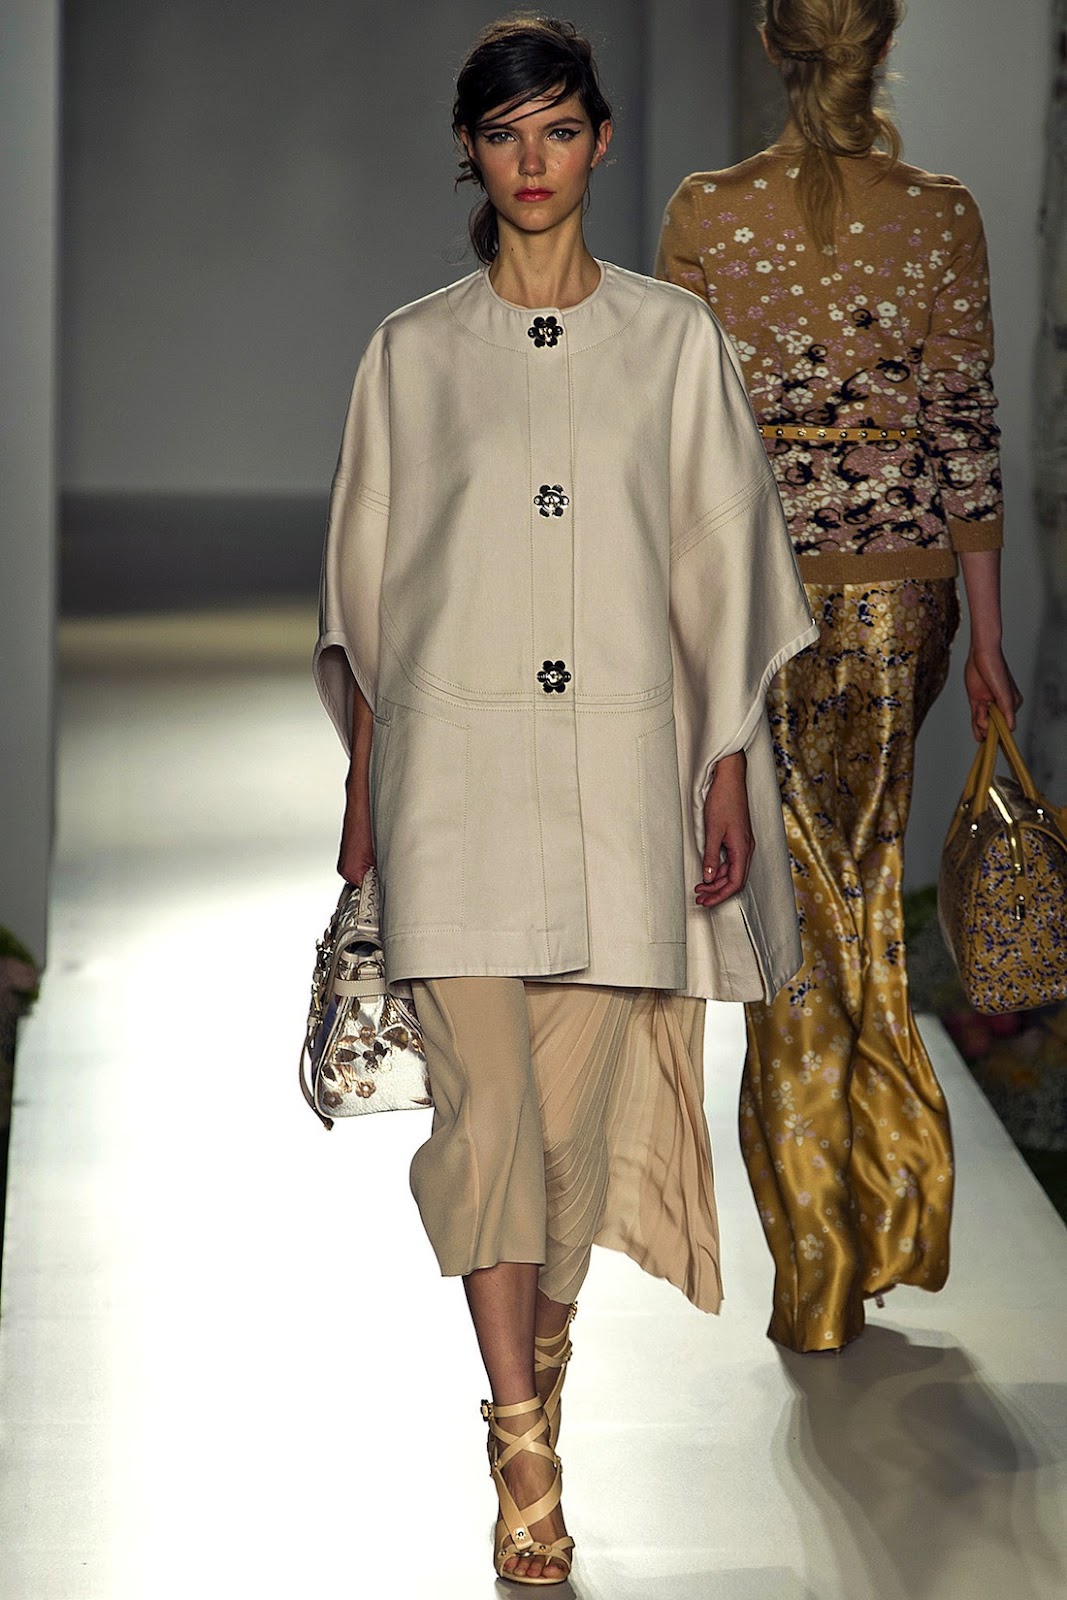 mulberry s/s 13 london | visual optimism; fashion editorials, shows ...